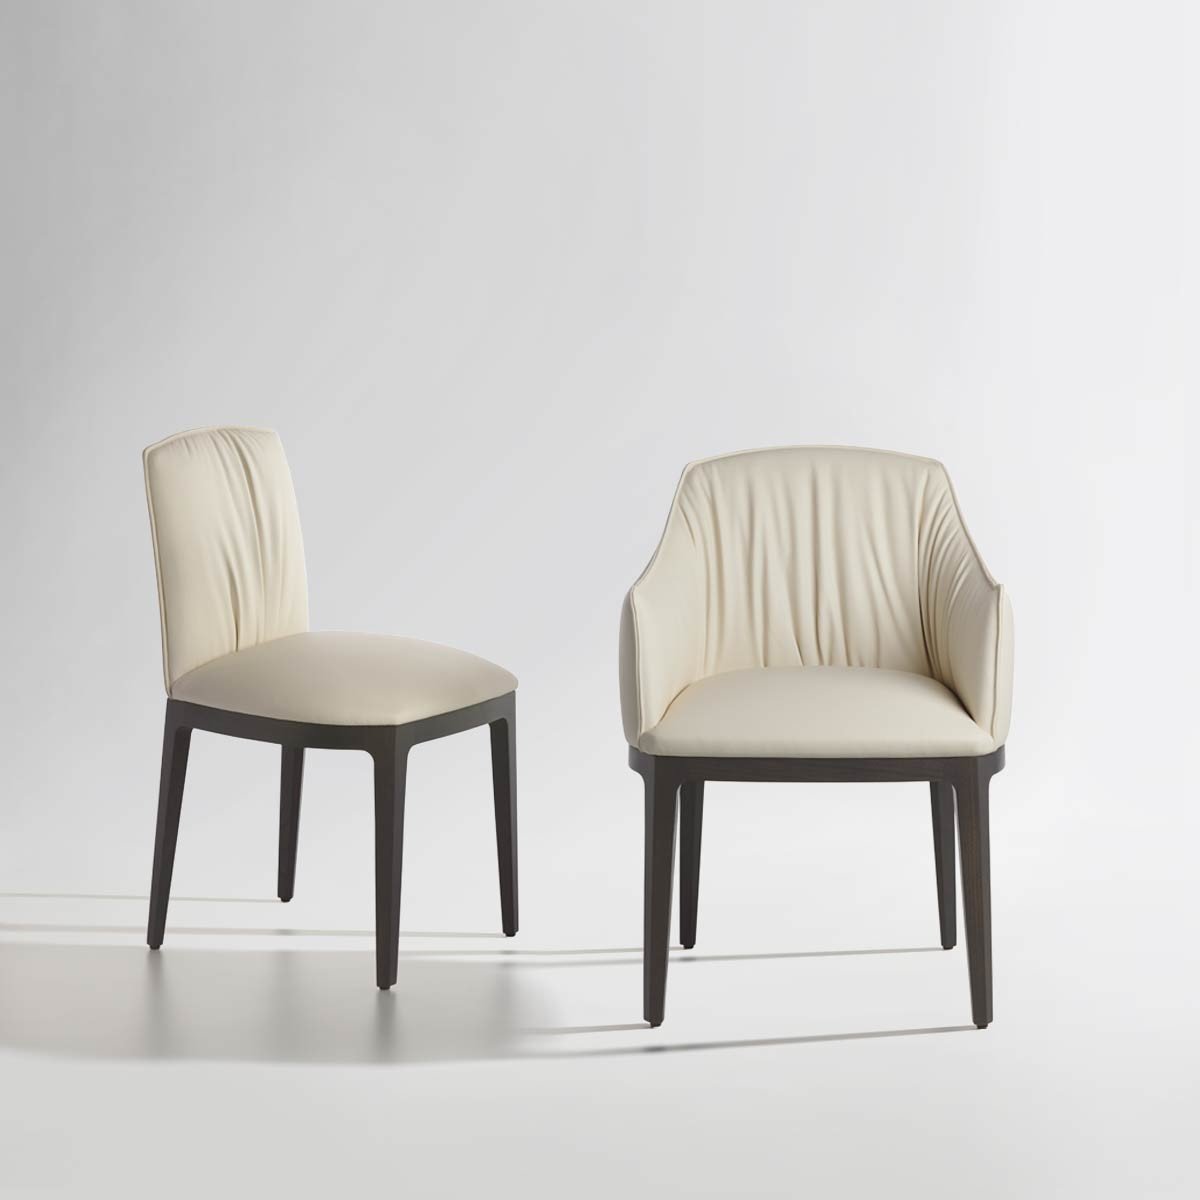 Blossom Chair from Potocco, designed by Bernhardt & Vella 